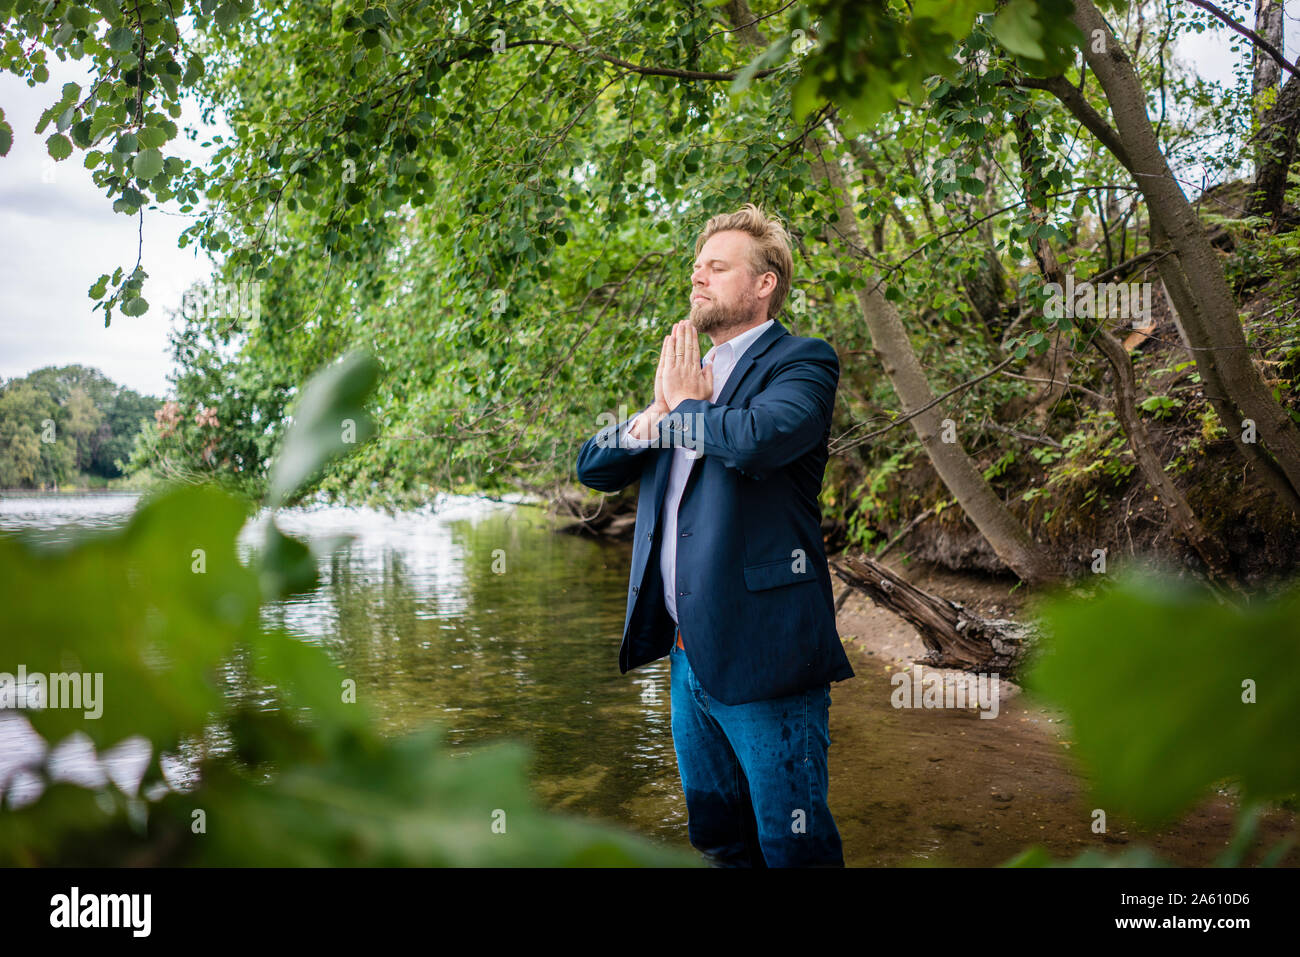 Businessman standing in a lake meditating Stock Photo